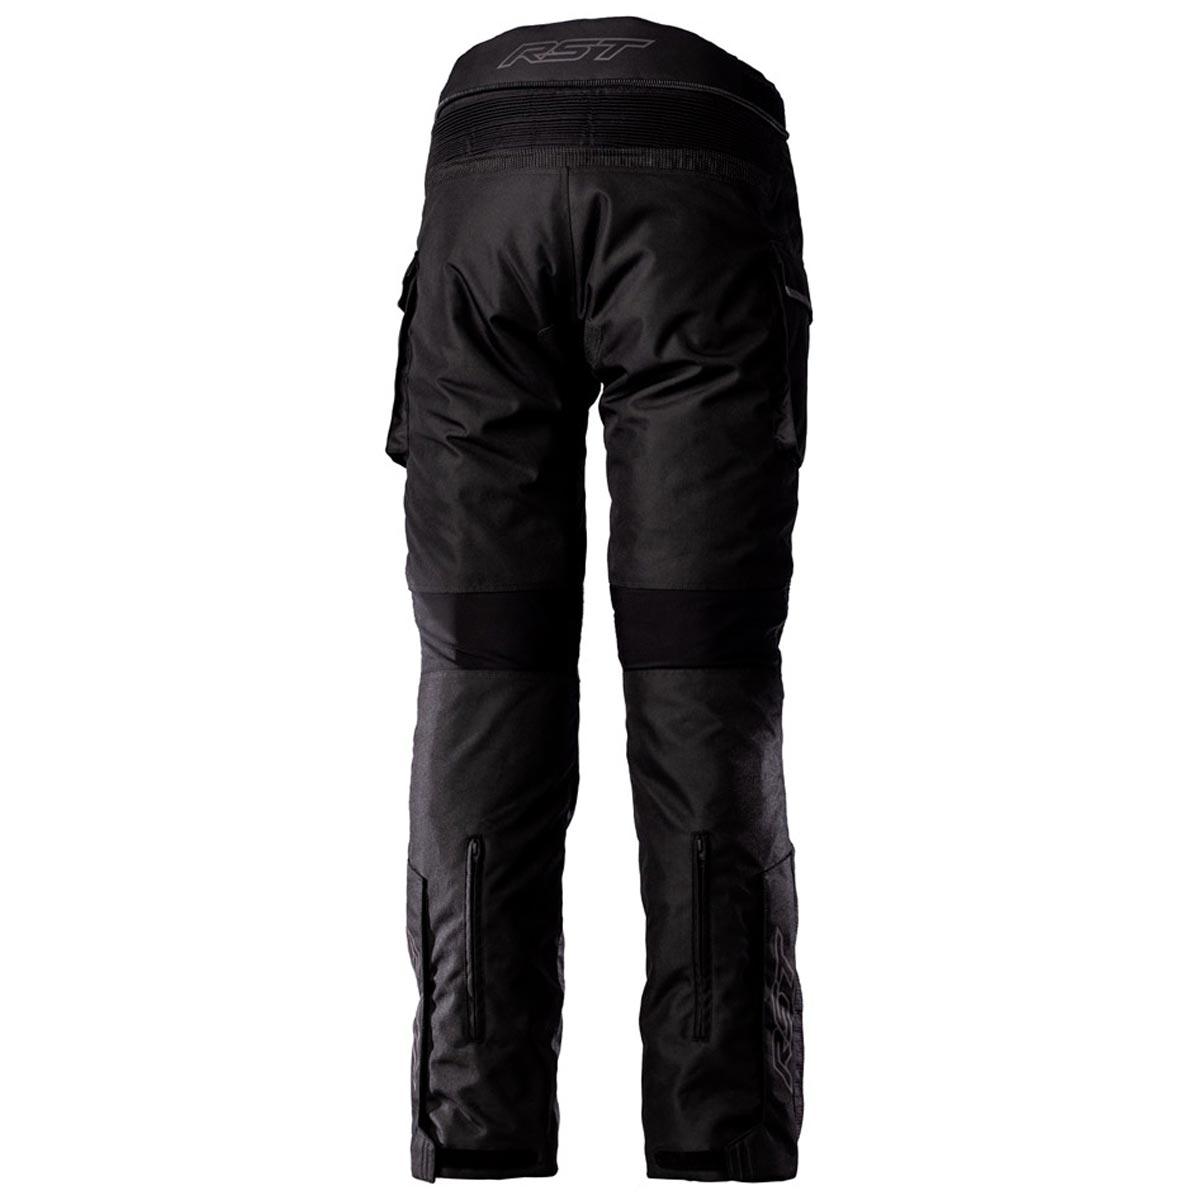 RST Endurance Trousers CE Short Leg WP  - Motorcycle Trousers